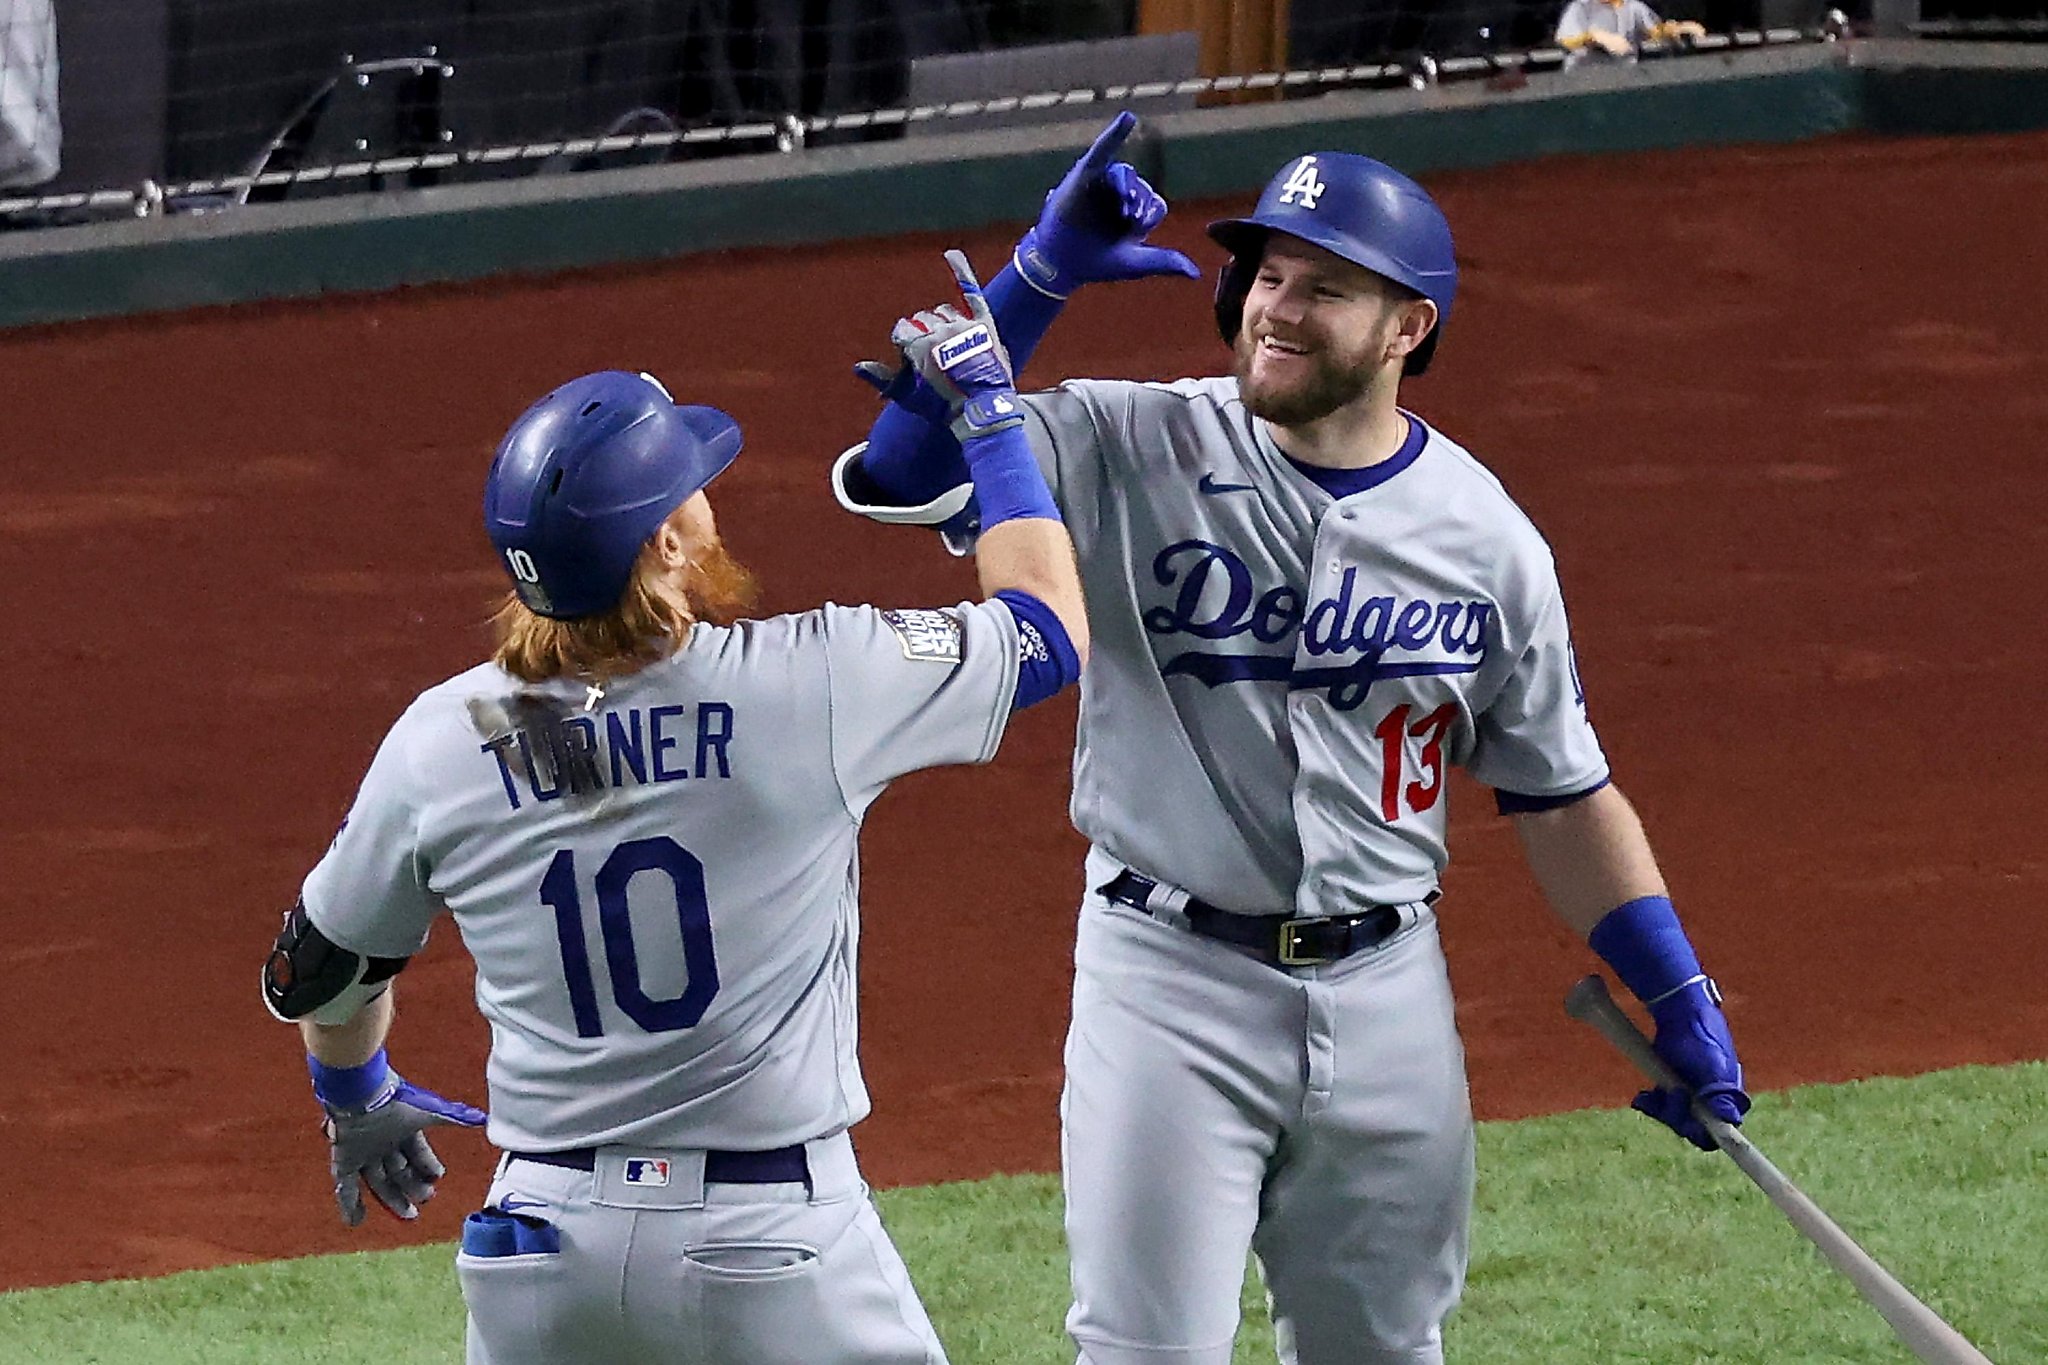 Dodgers News: Max Muncy Acknowledges 'Different' Feel In Spring Training,  Wants To Take Same Approach As Previous Years - Dodger Blue